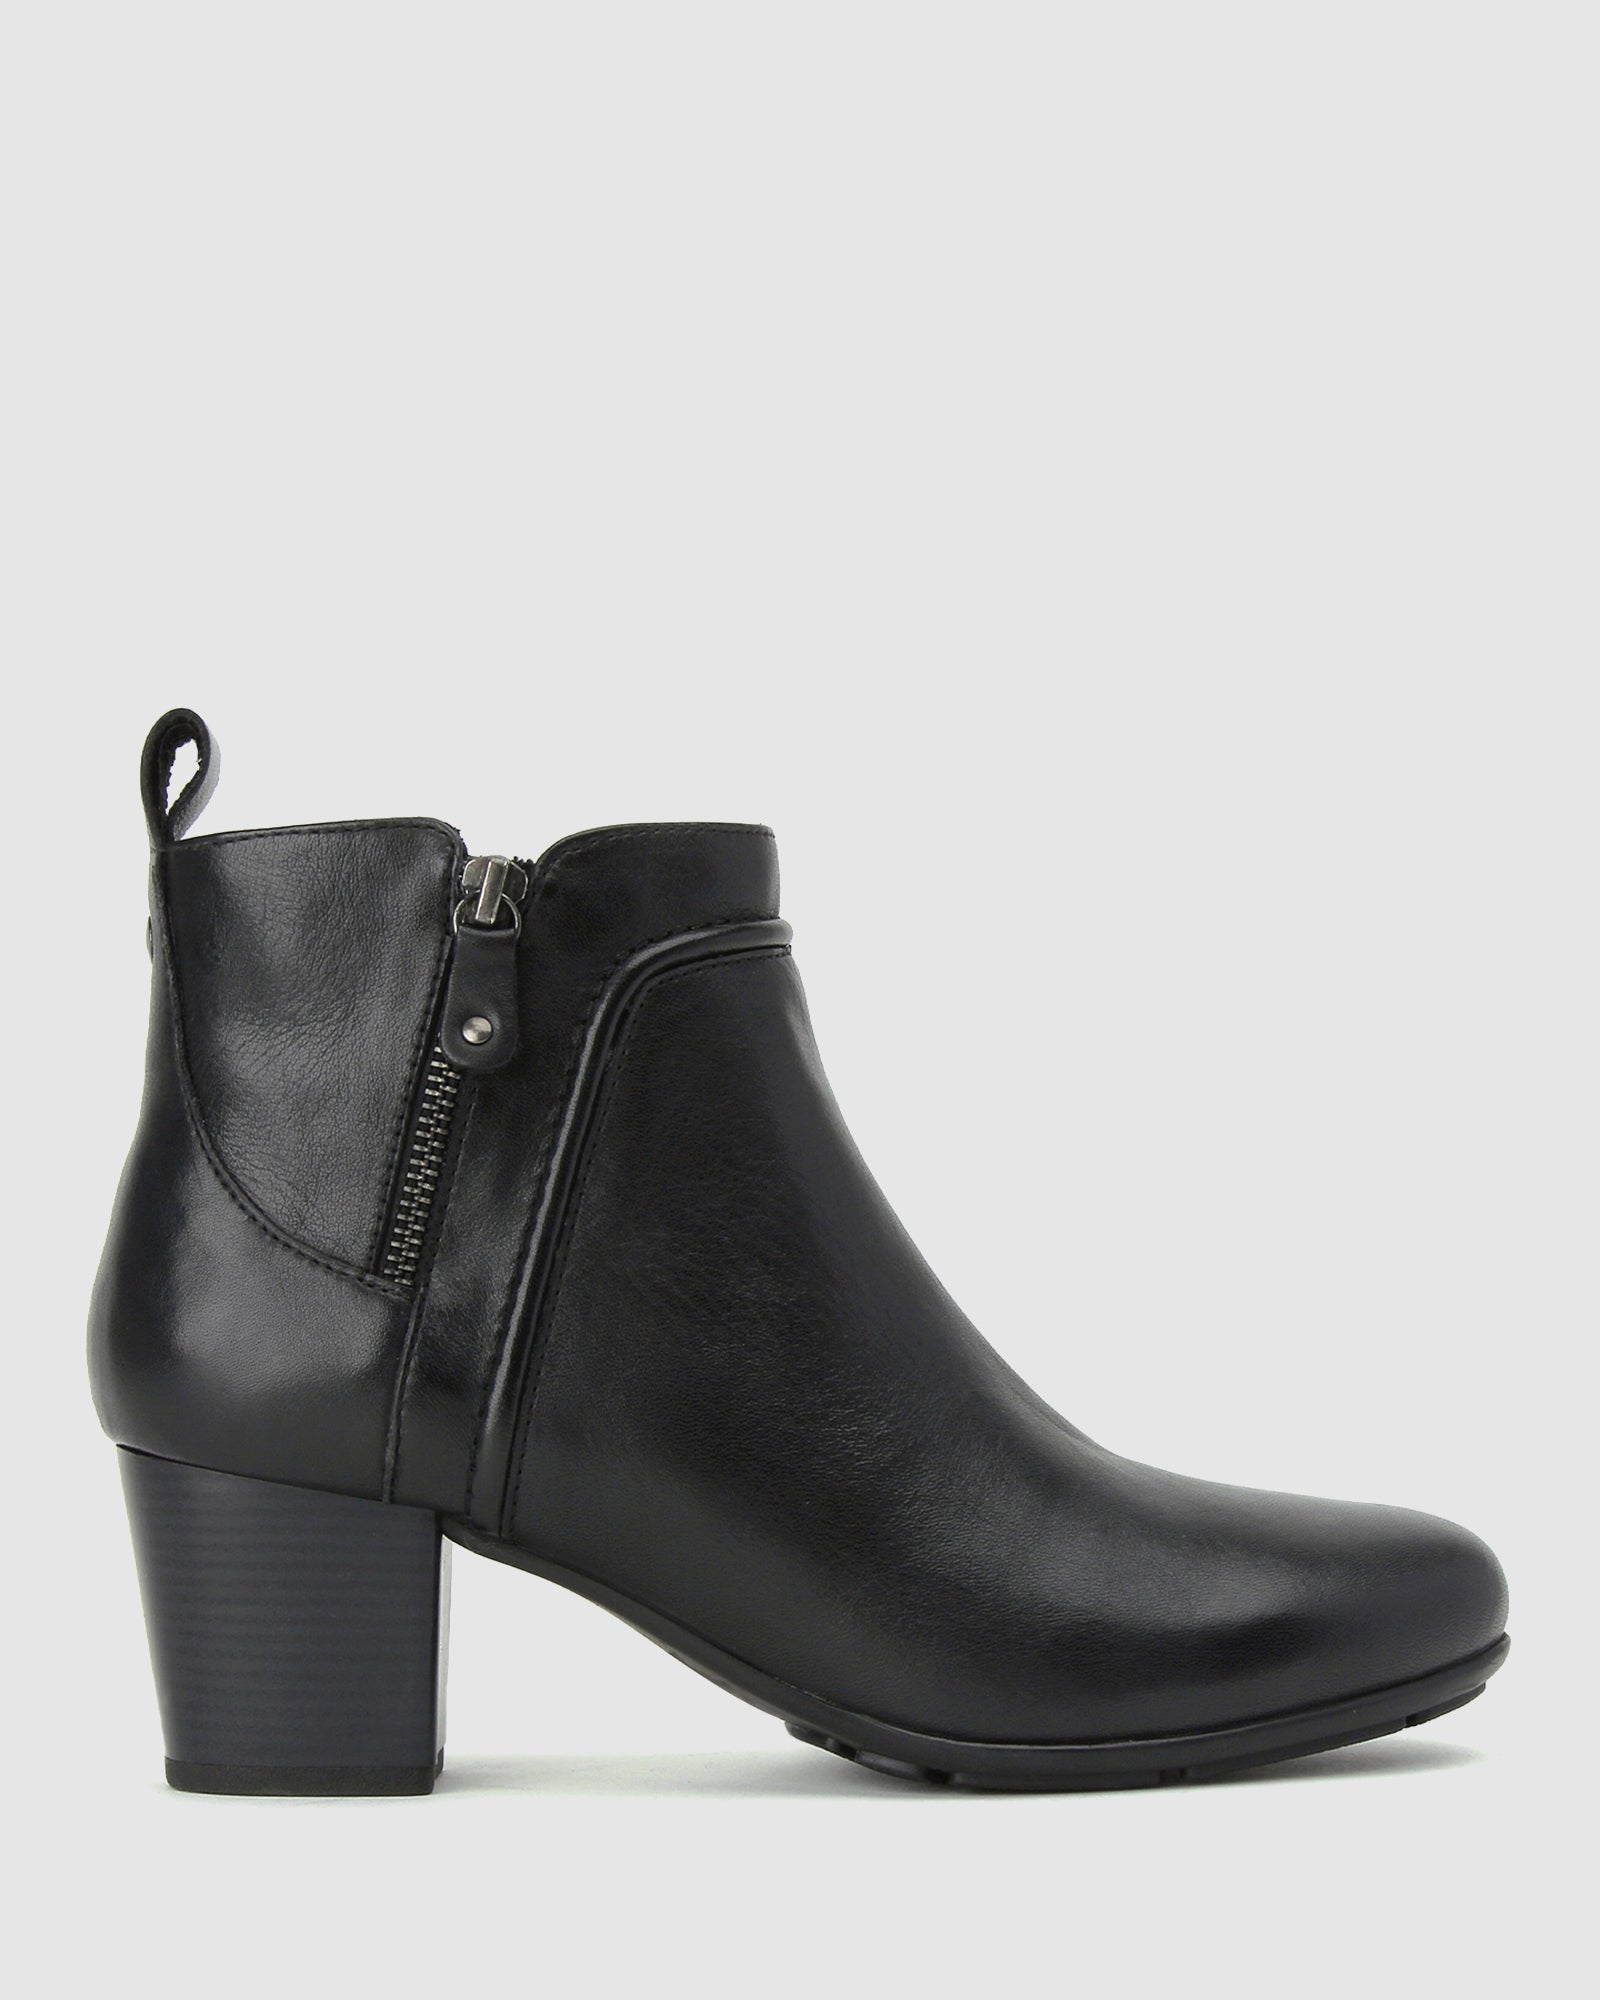 Buy GHOST Leather Ankle Boots by Airflex online - Betts